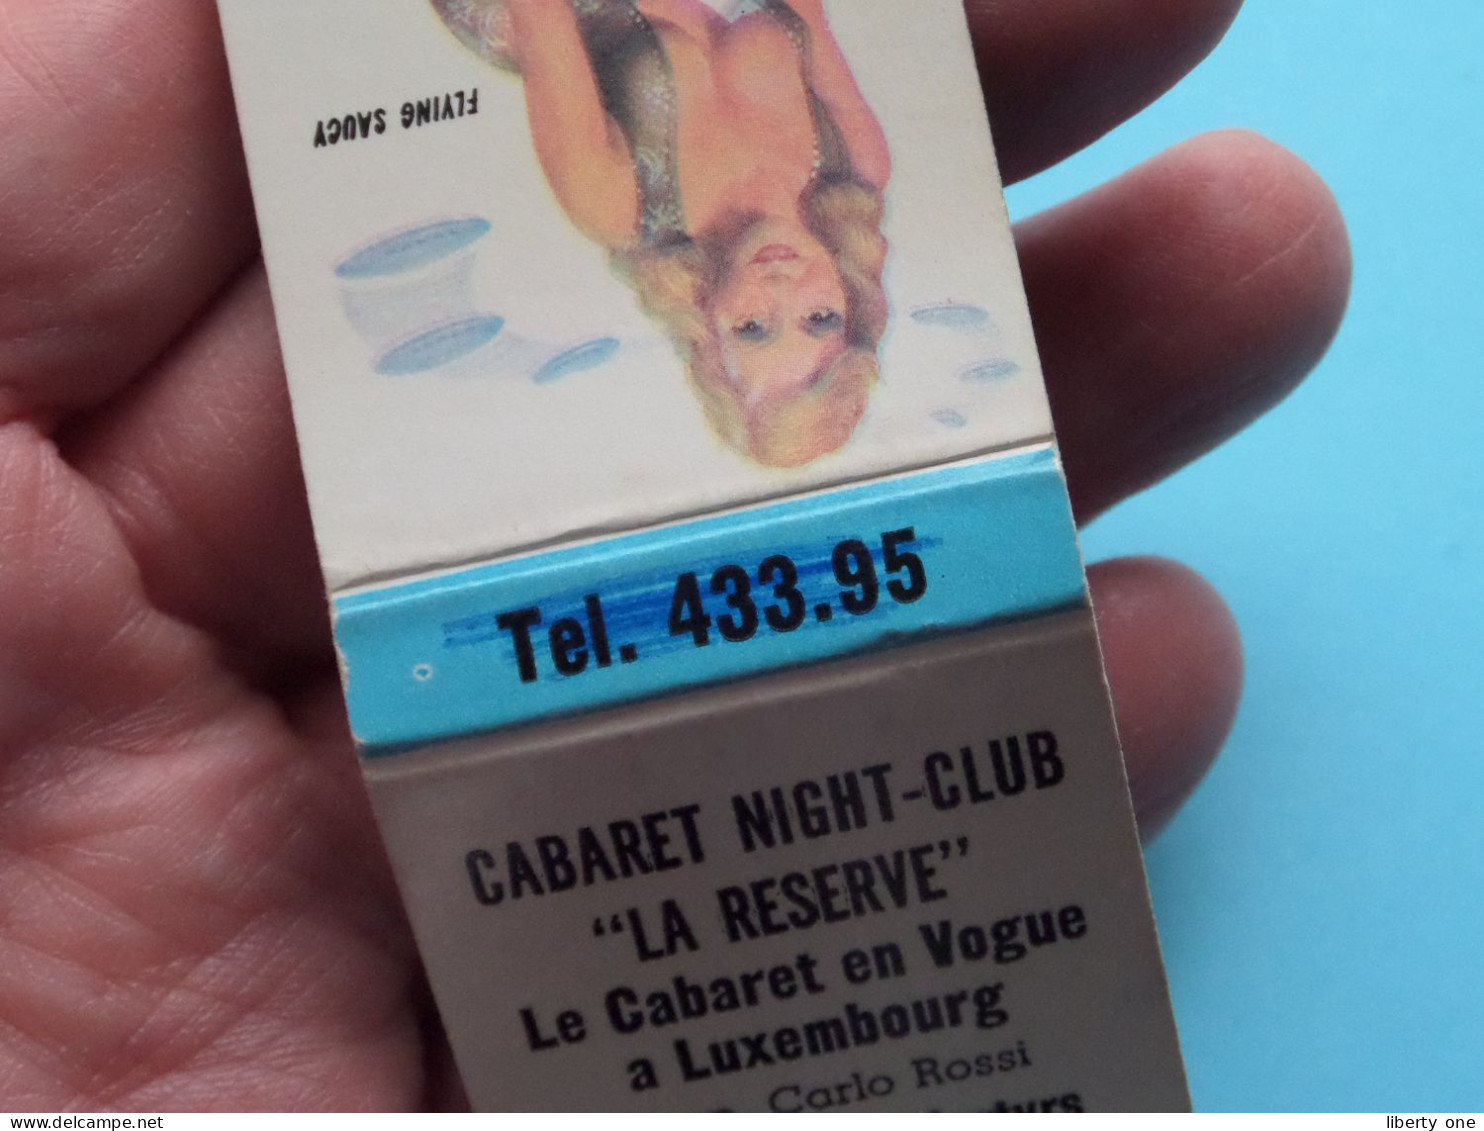 CABARET NIGHT-CLUB " LA RESERVE " à LUXEMBOURG > Flying Saucy ( Prop. Carlo Rossi ) Regal Batch C° USA ! - Objets Publicitaires